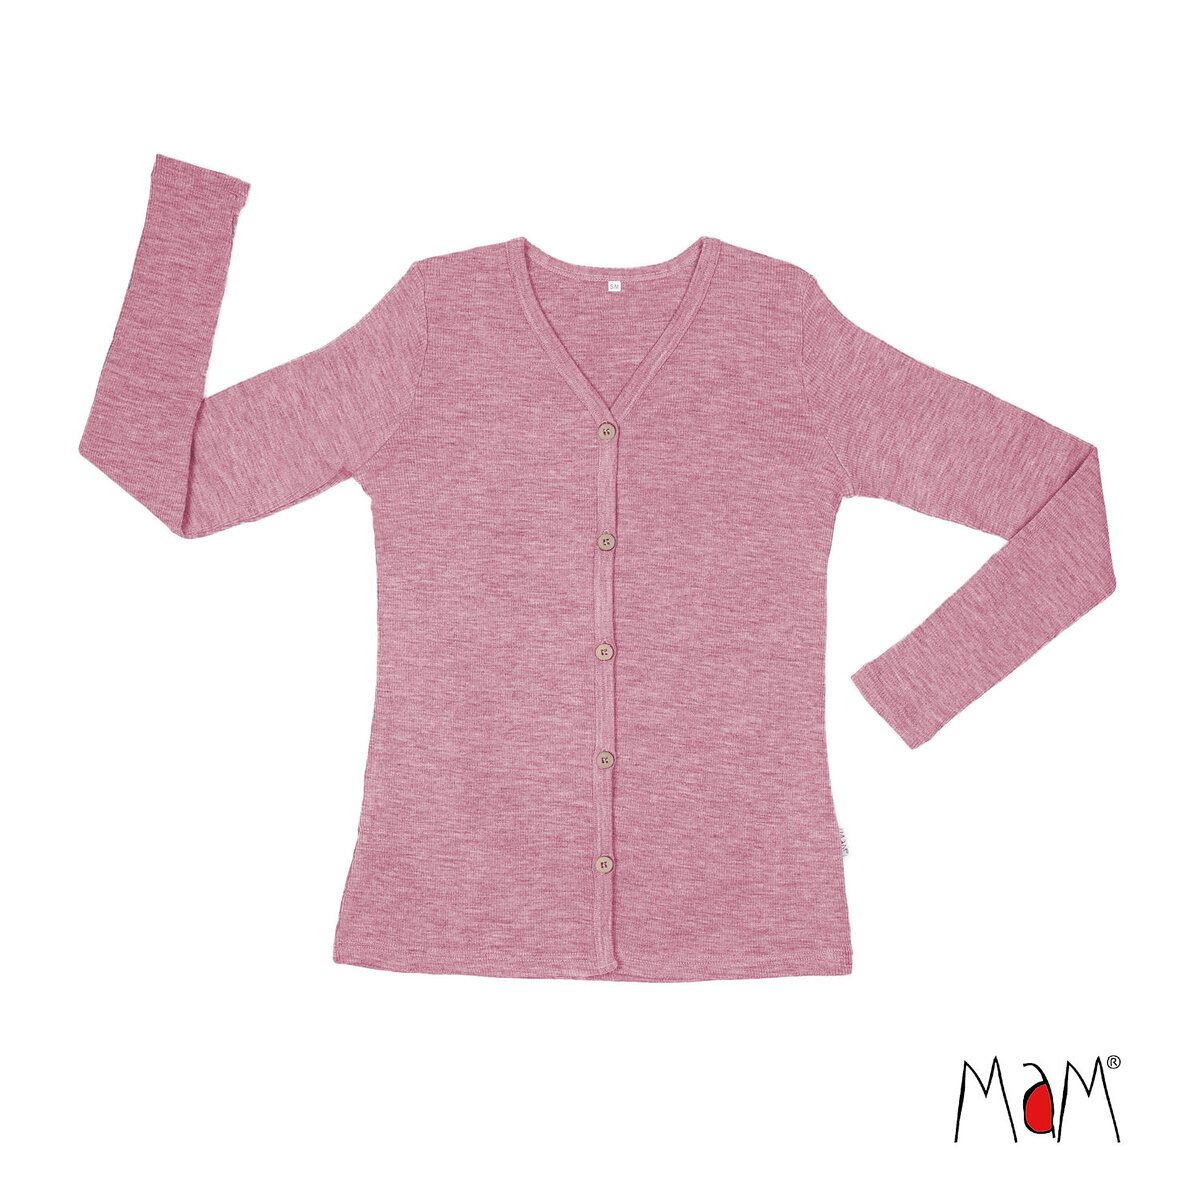 MaM Natural Woollies Button-Up Cardigan (Size: S/M / Color: West Wind Rose)